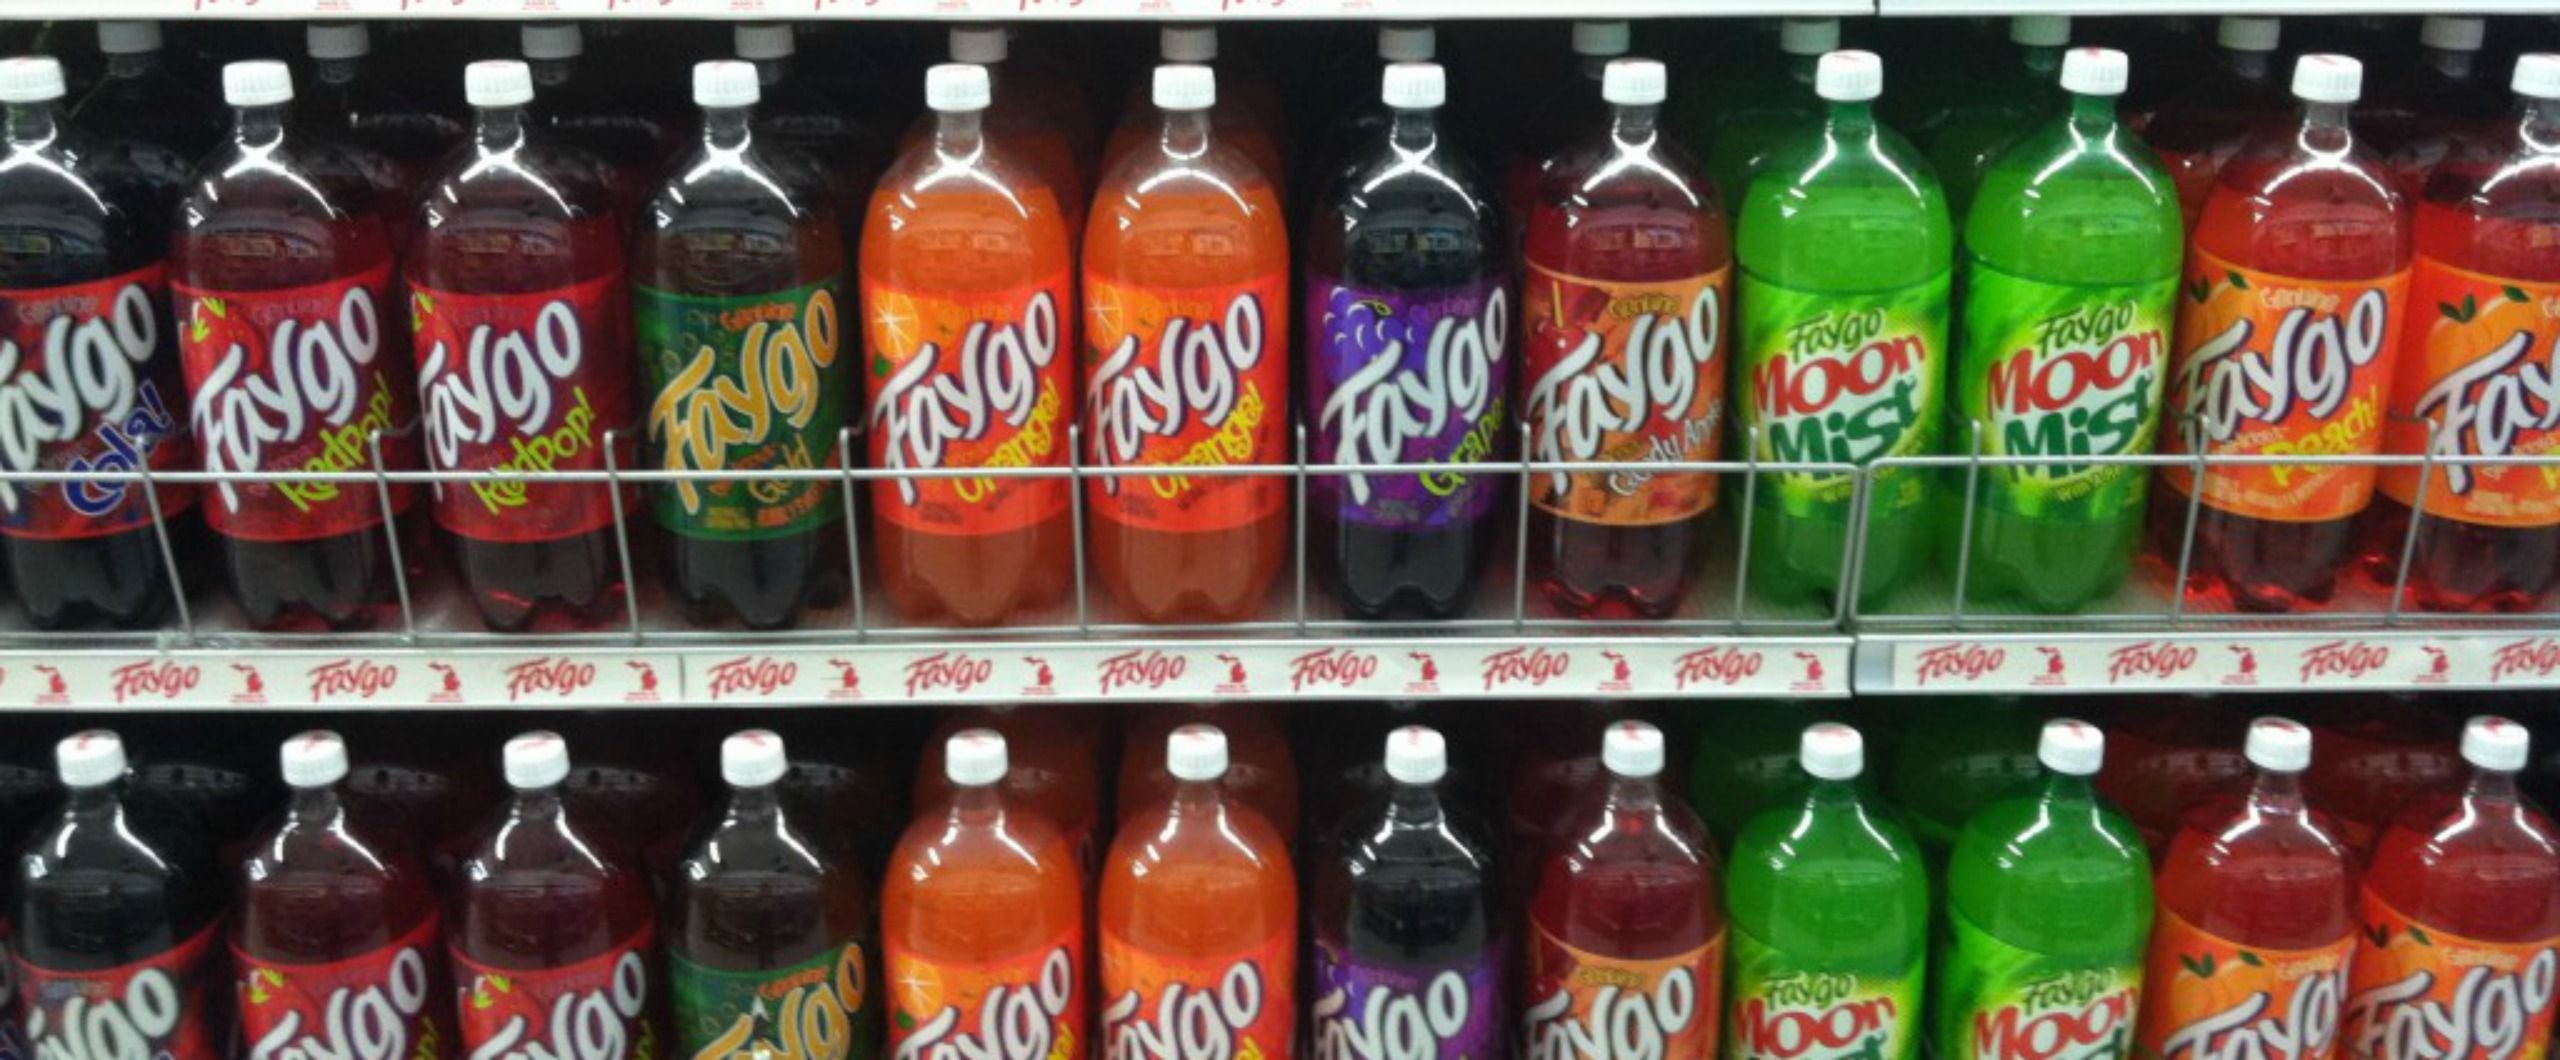 How A Jewish Soda Company Helped The Insane Clown Posse Fight The